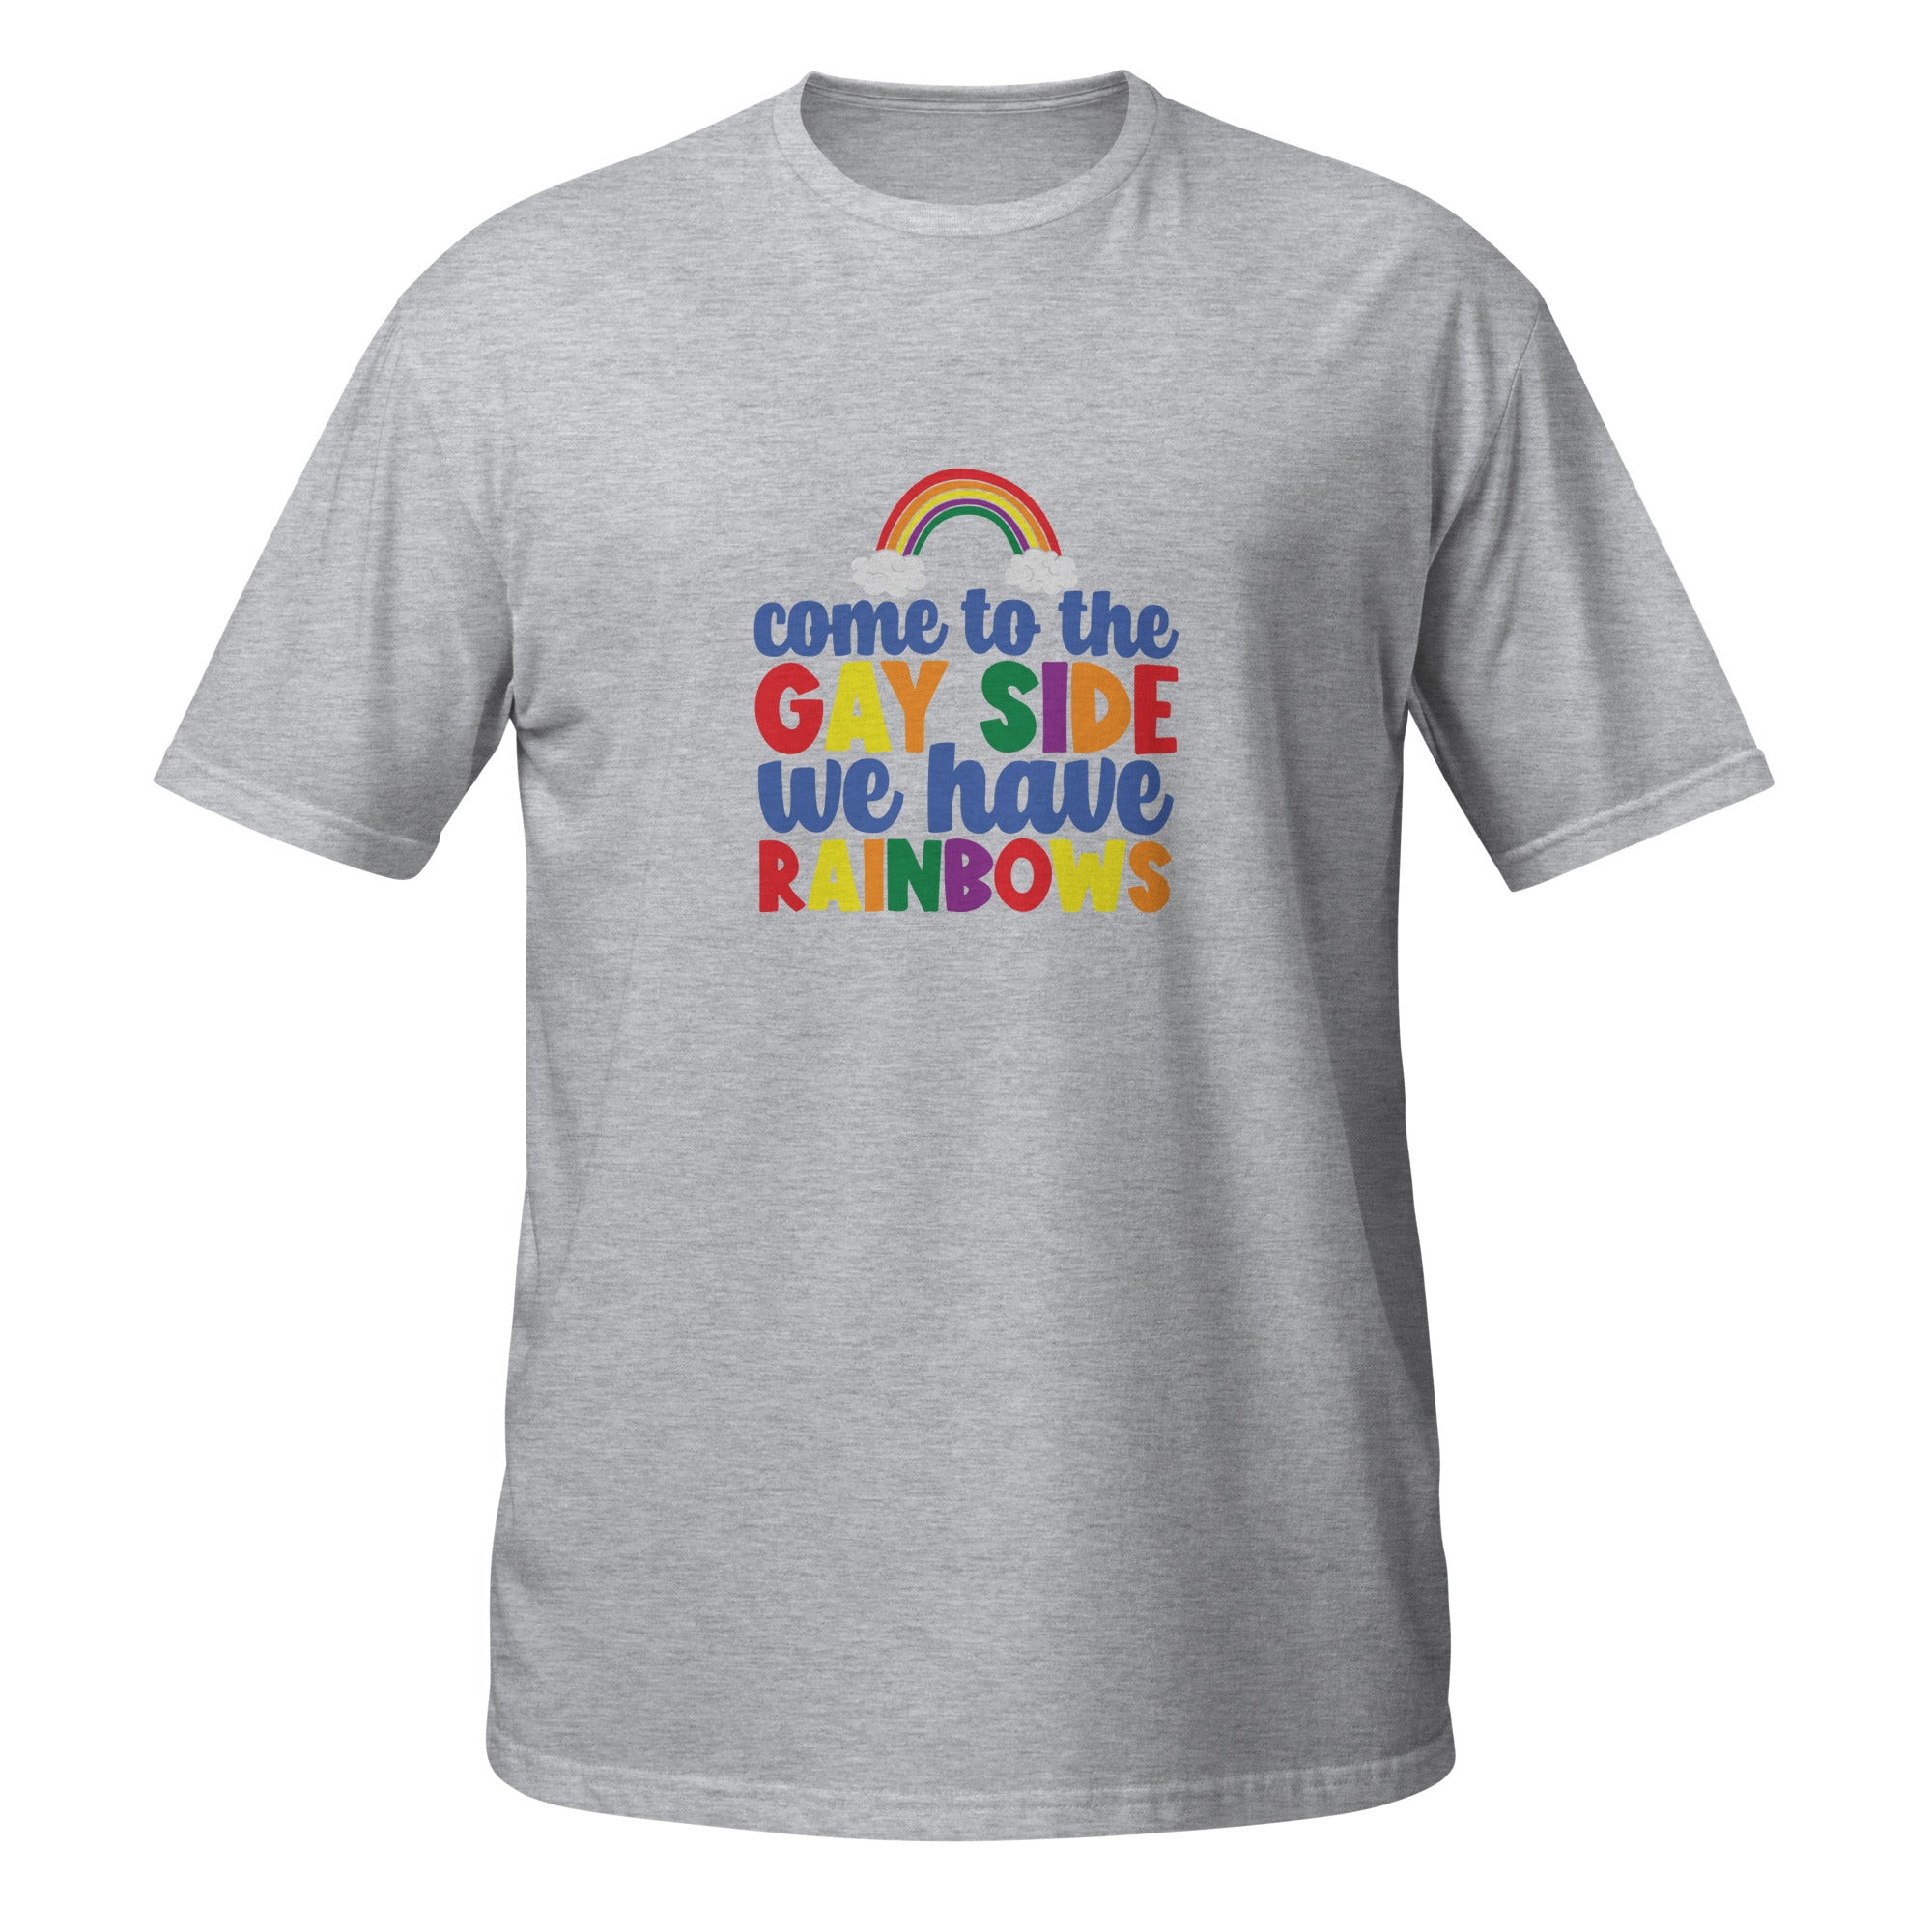 Short-Sleeve Unisex T-Shirt- Come to the gay side we have rainbows